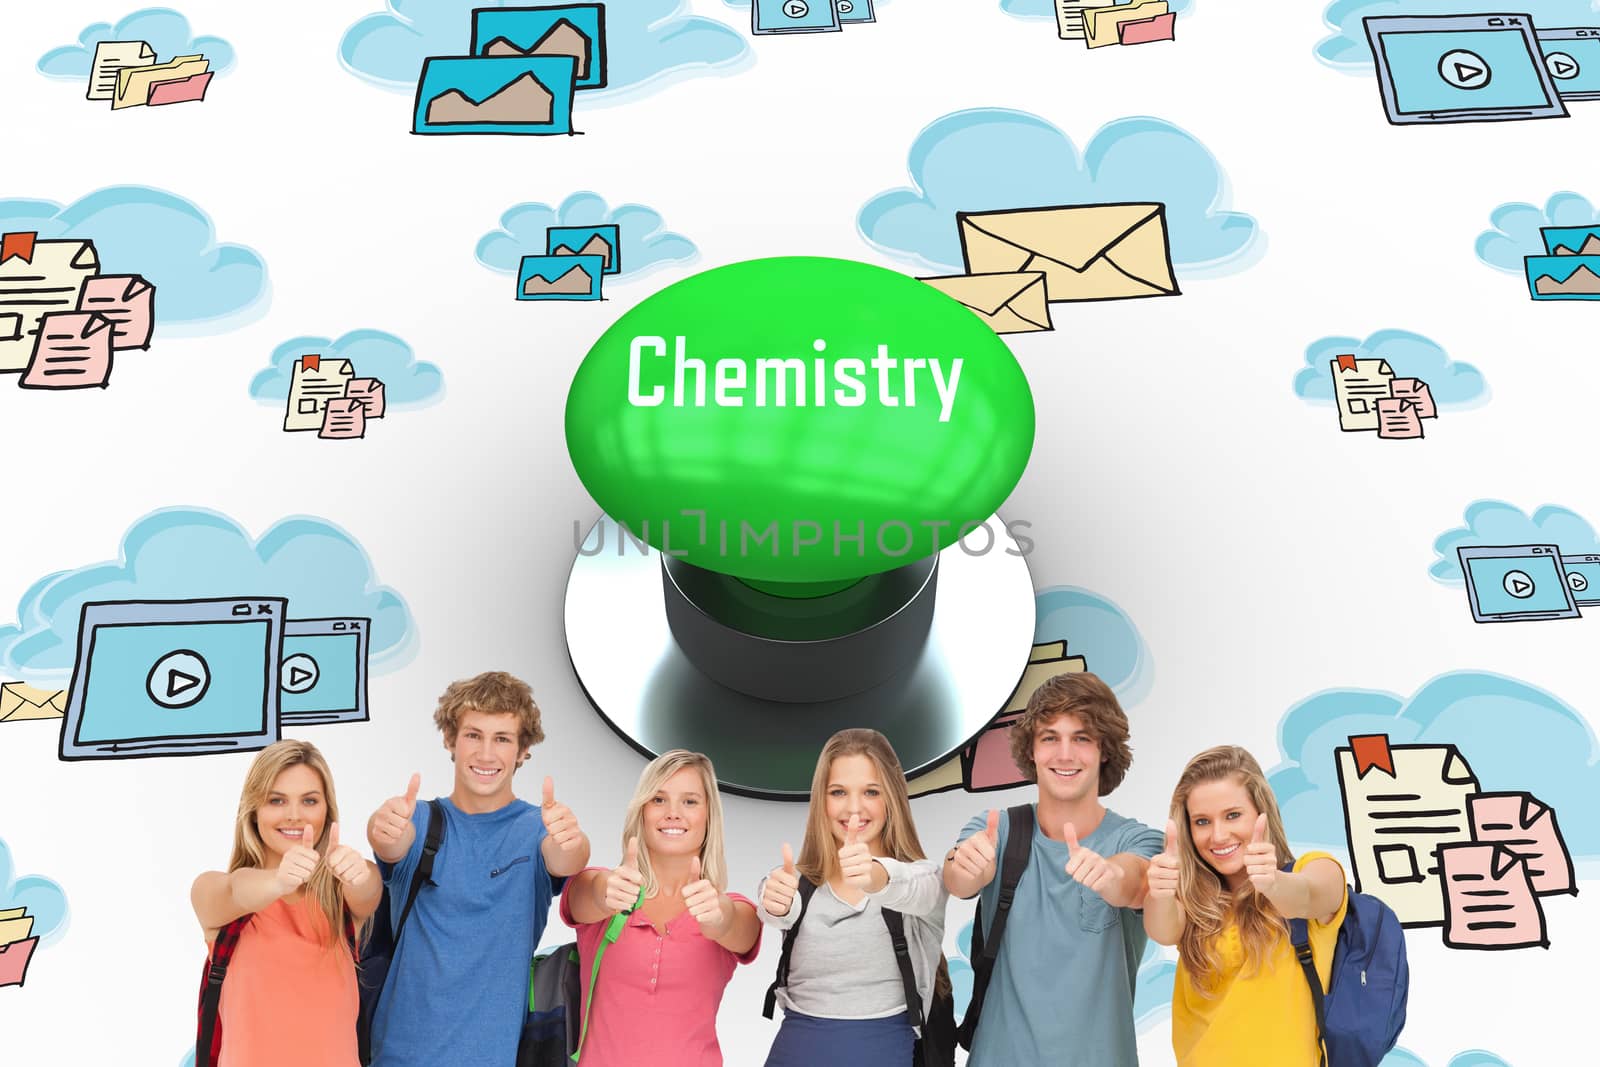 The word chemistry and smiling group giving a thumbs up as they wear backpacks against digitally generated green push button